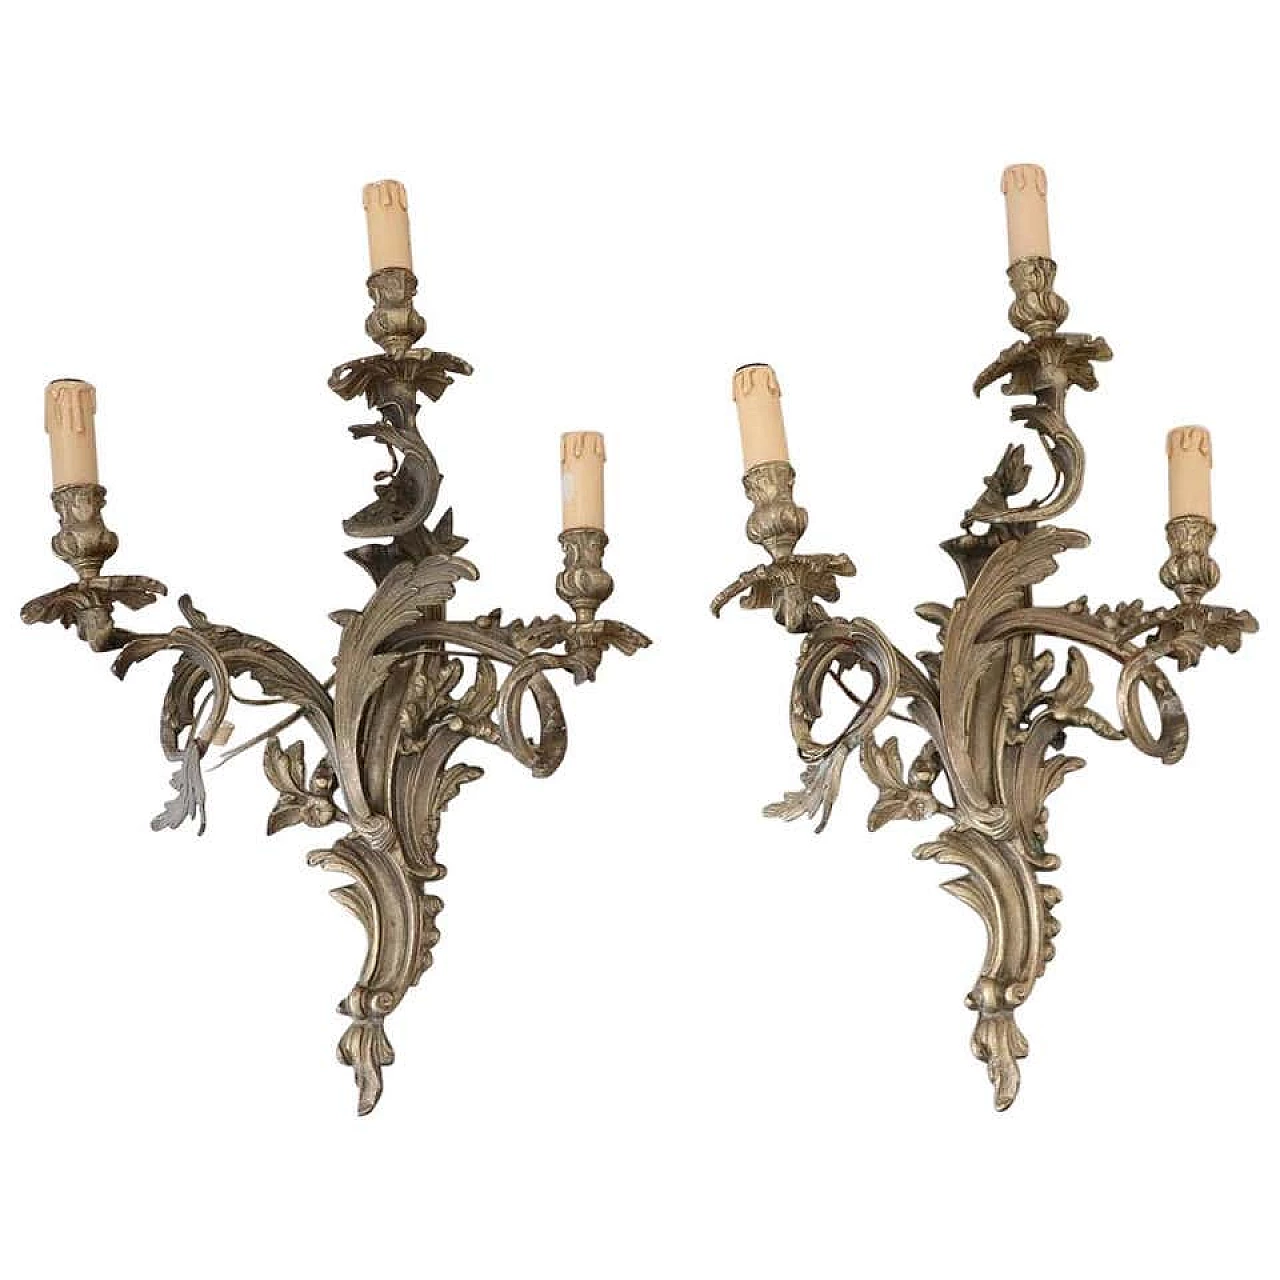 Pair of gilded bronze wall lights, 19th century 1277870